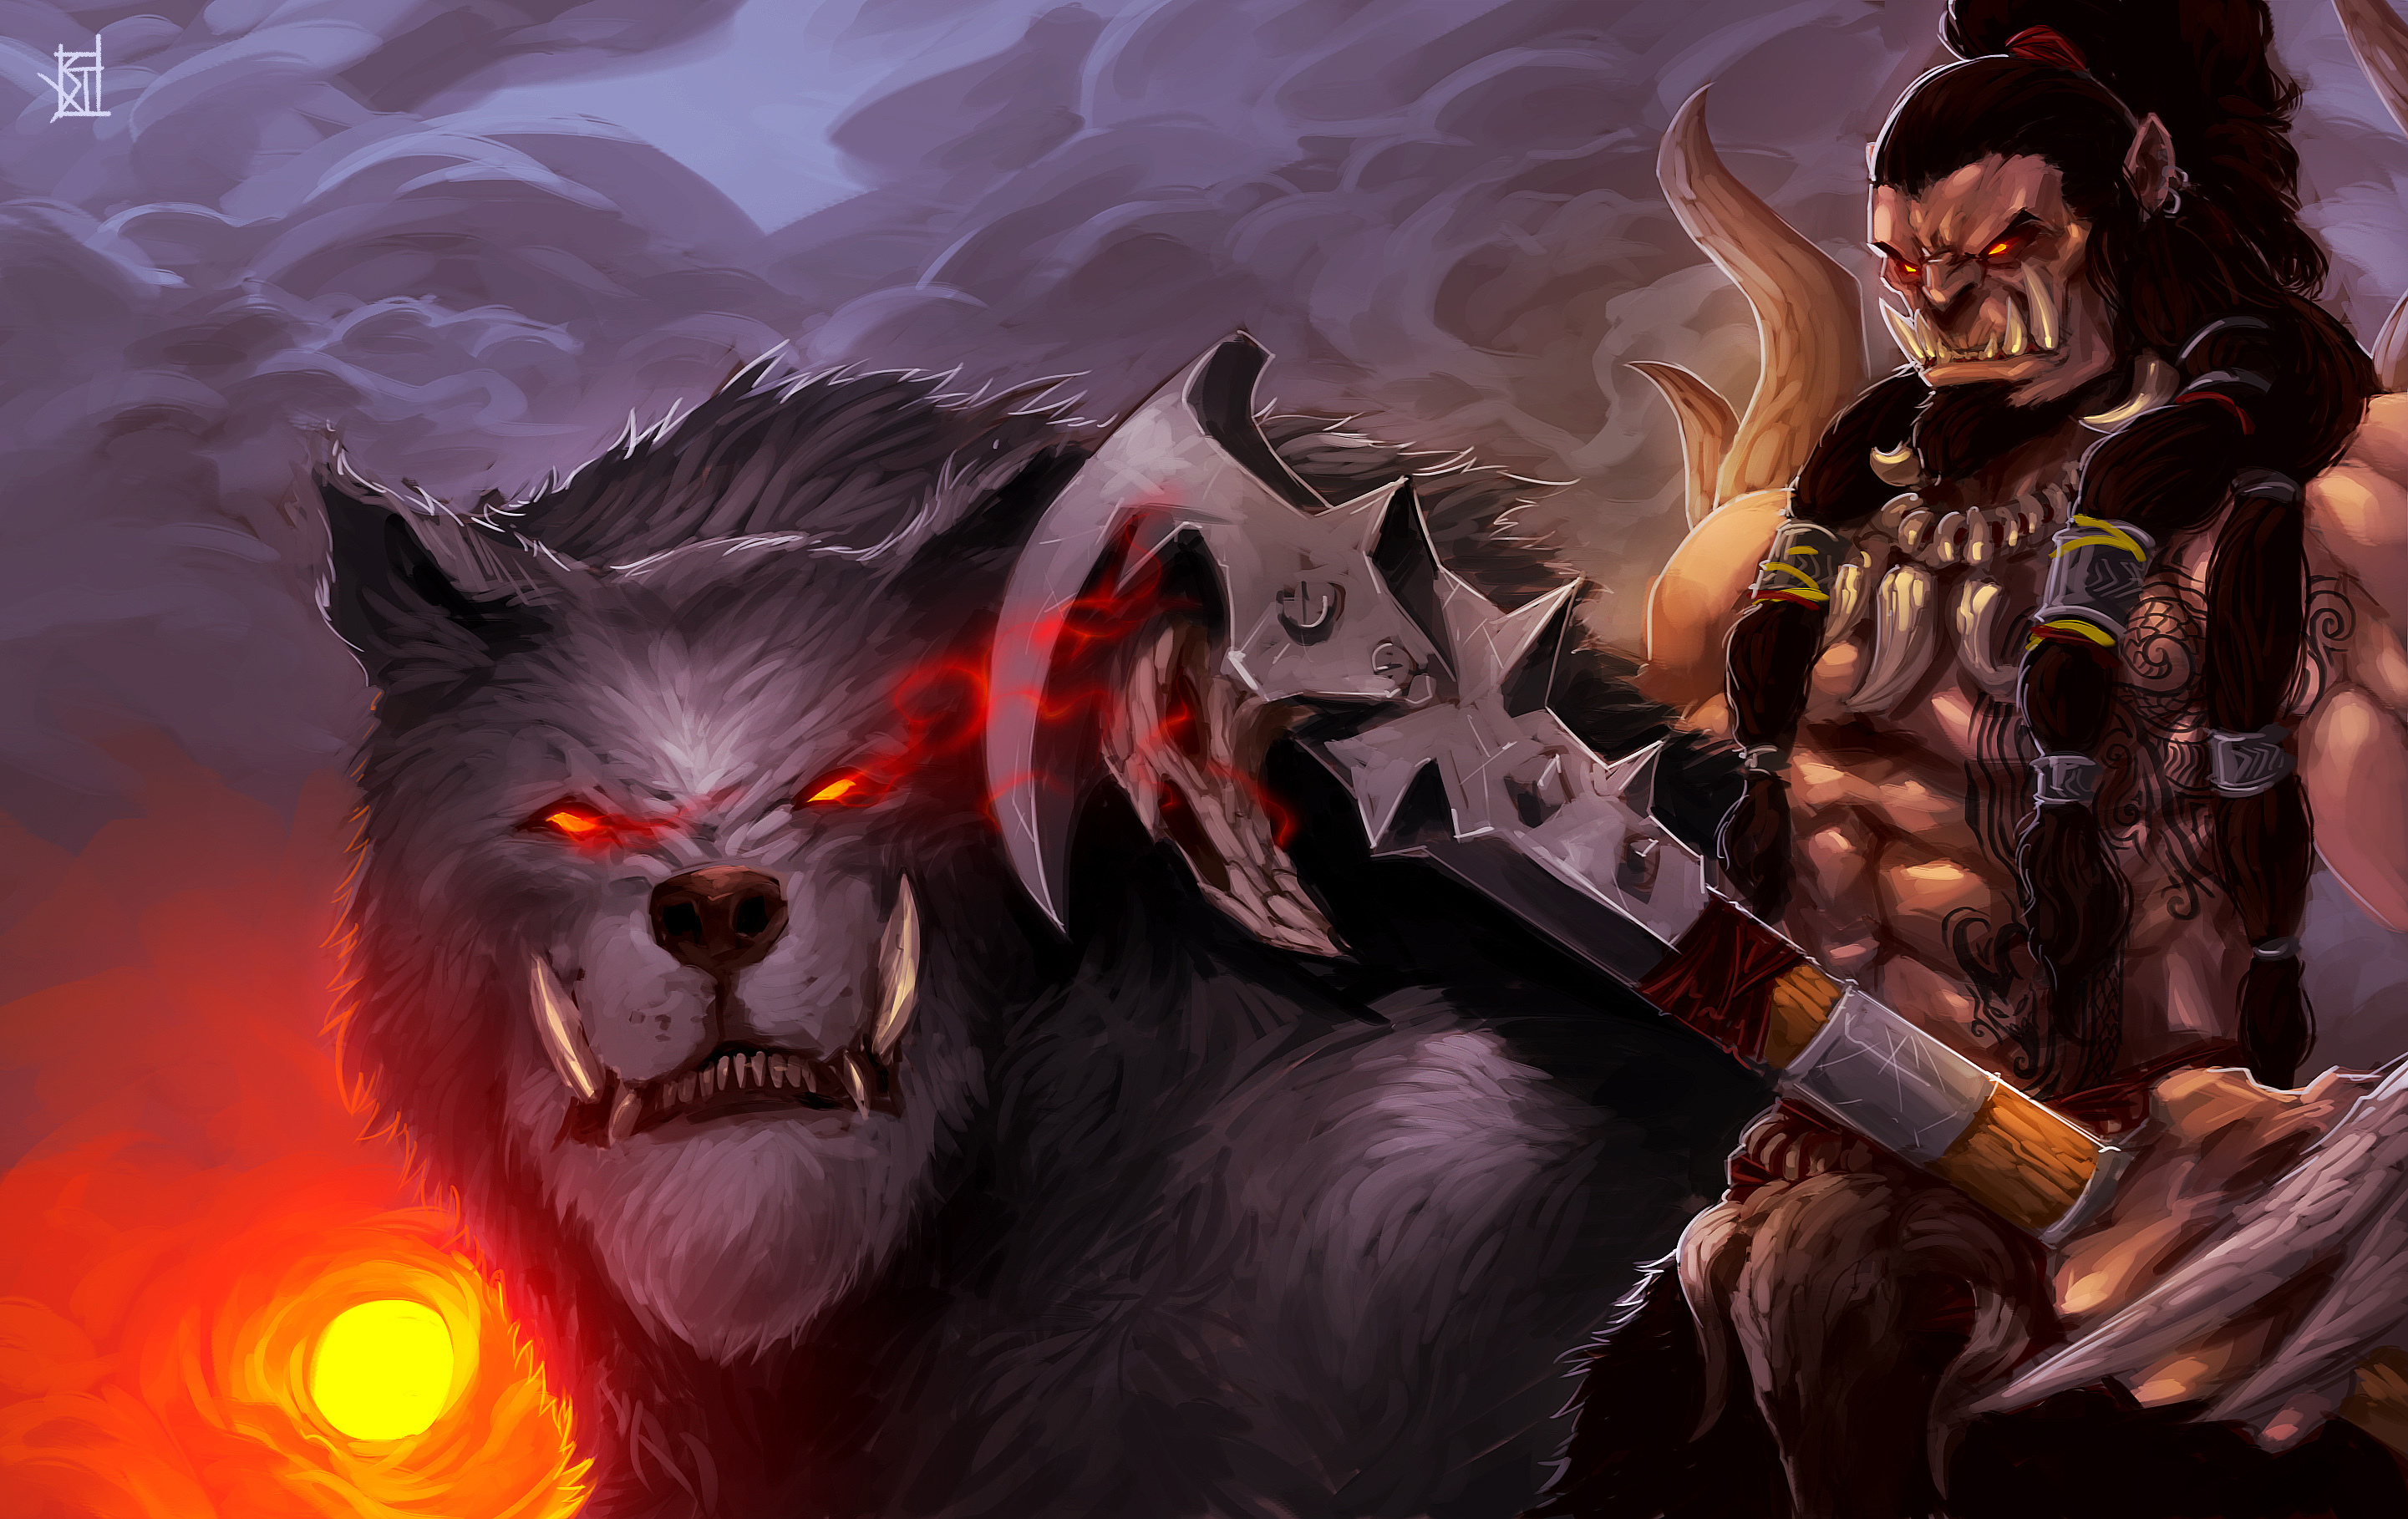 Axe Orc Warcraft Warrior Wolf 2882x1818